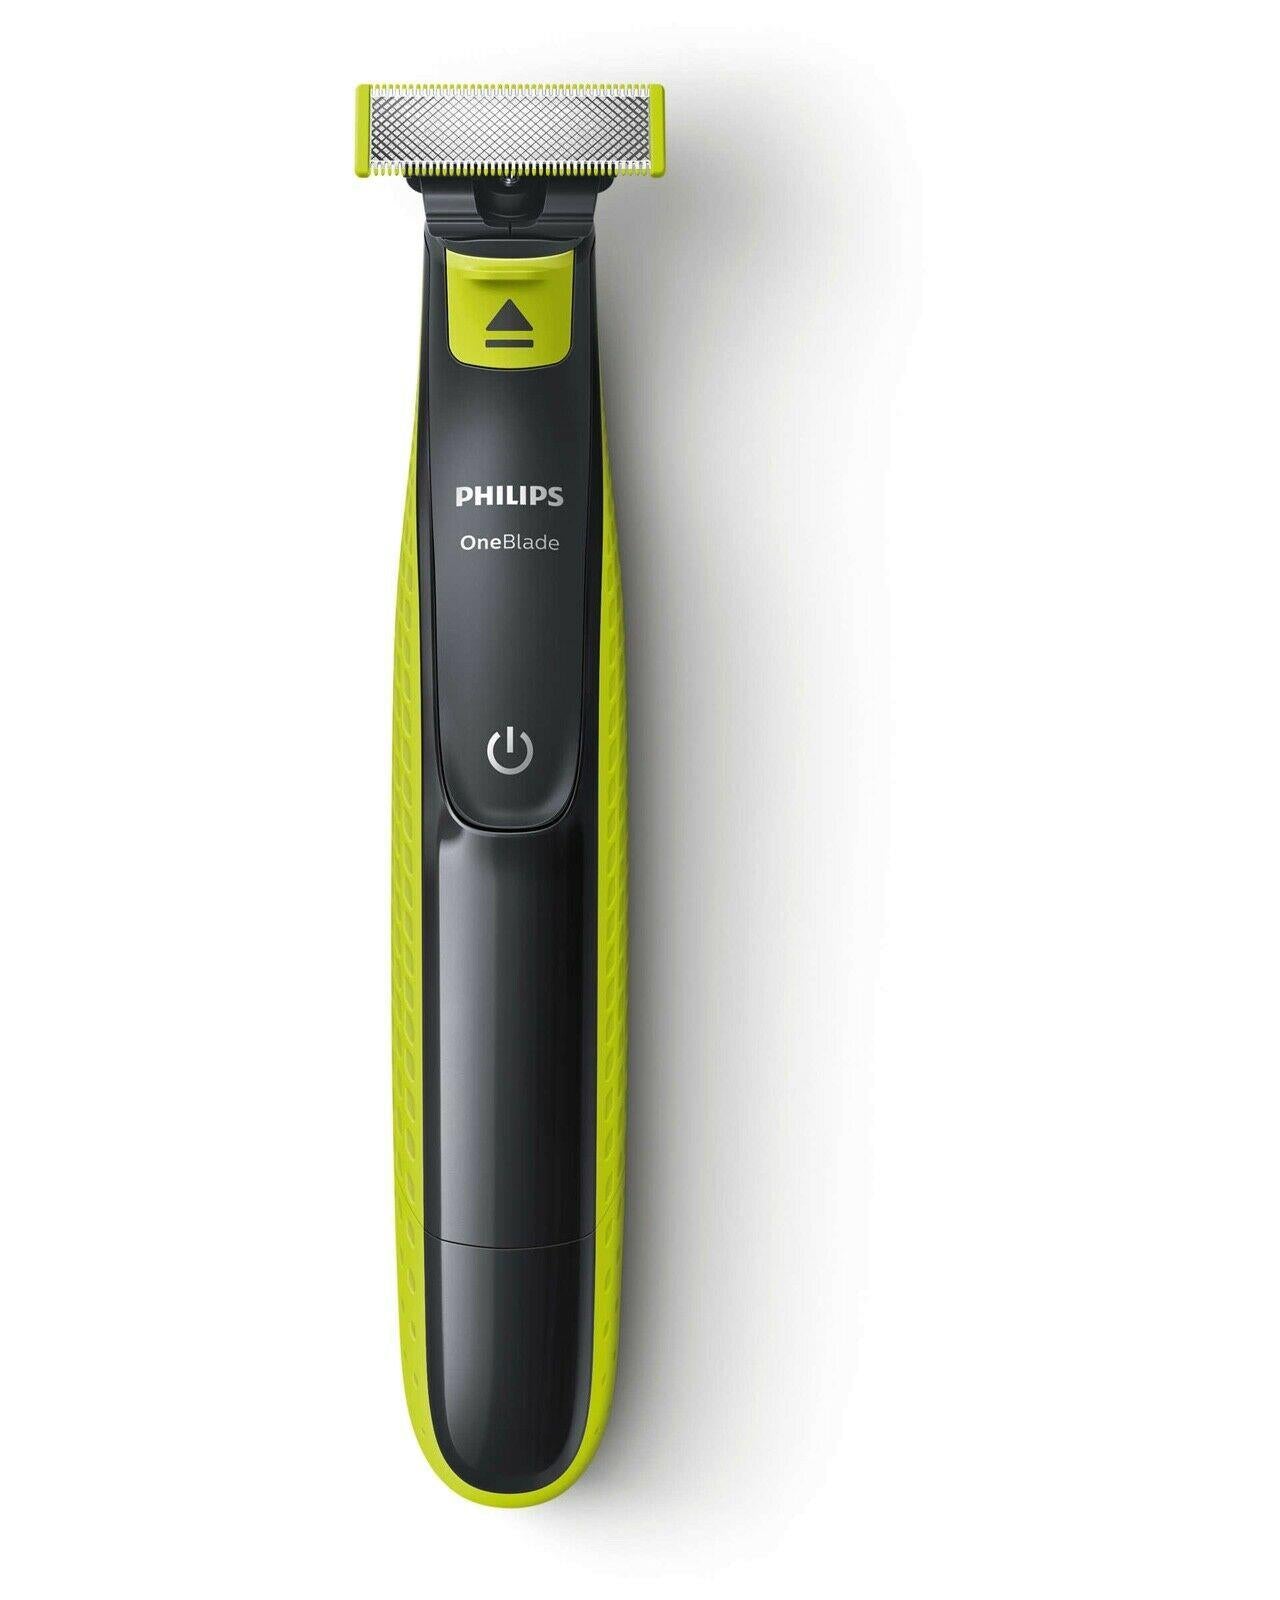 Philips Oneblade Qp2520 Hybrid Trimmer Wet Dry Facial Hair Shaver